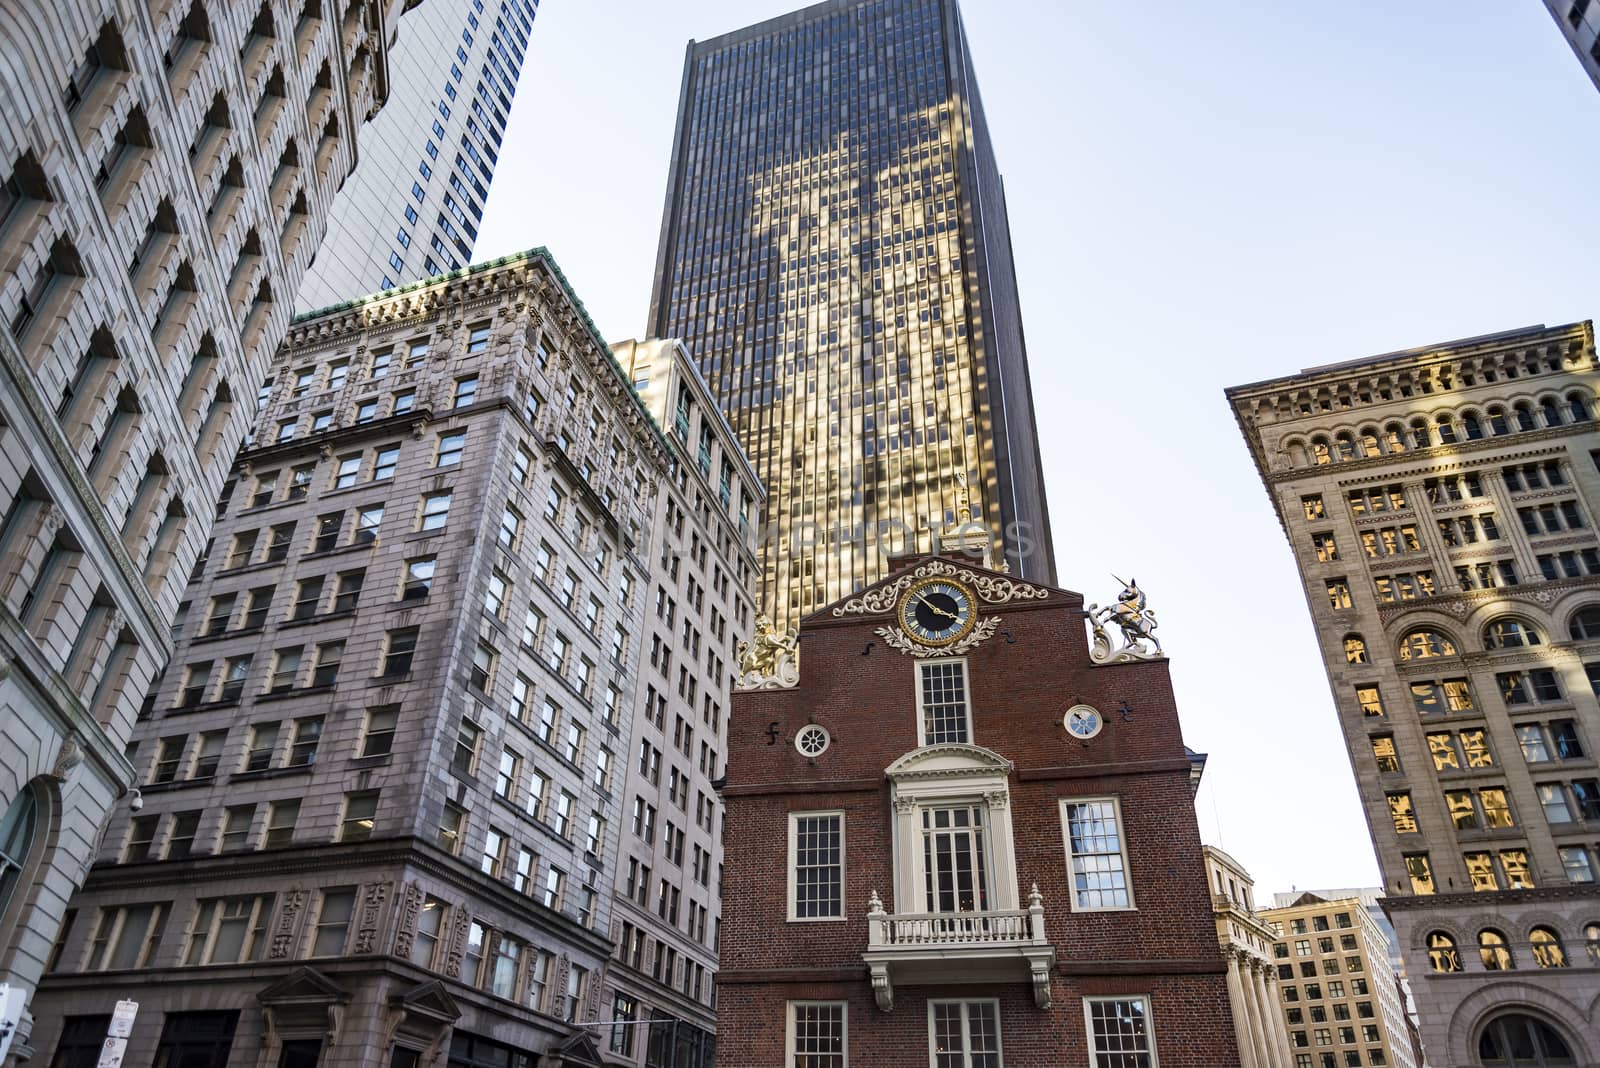 Boston Old State House building by edella